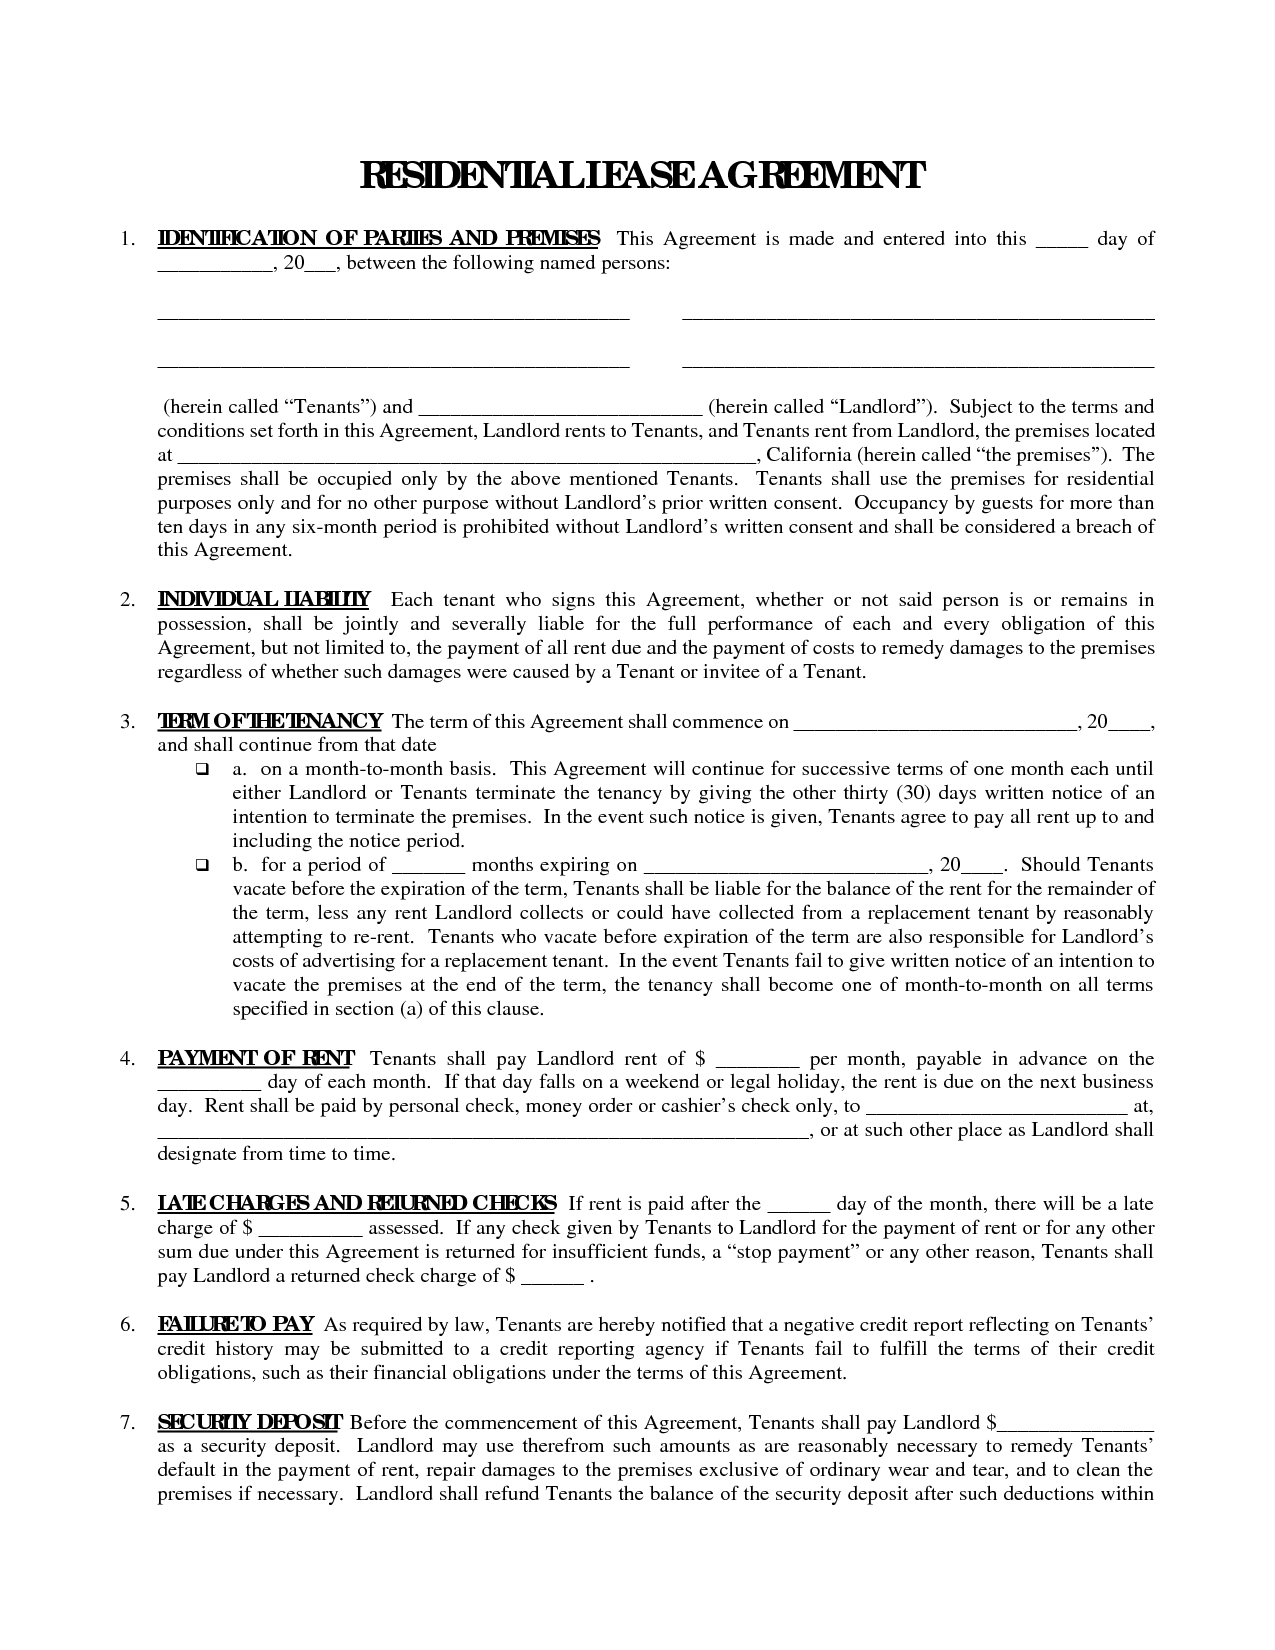 Printable Residential Free House Lease Agreement | Residential Lease - Free Printable Basic Rental Agreement